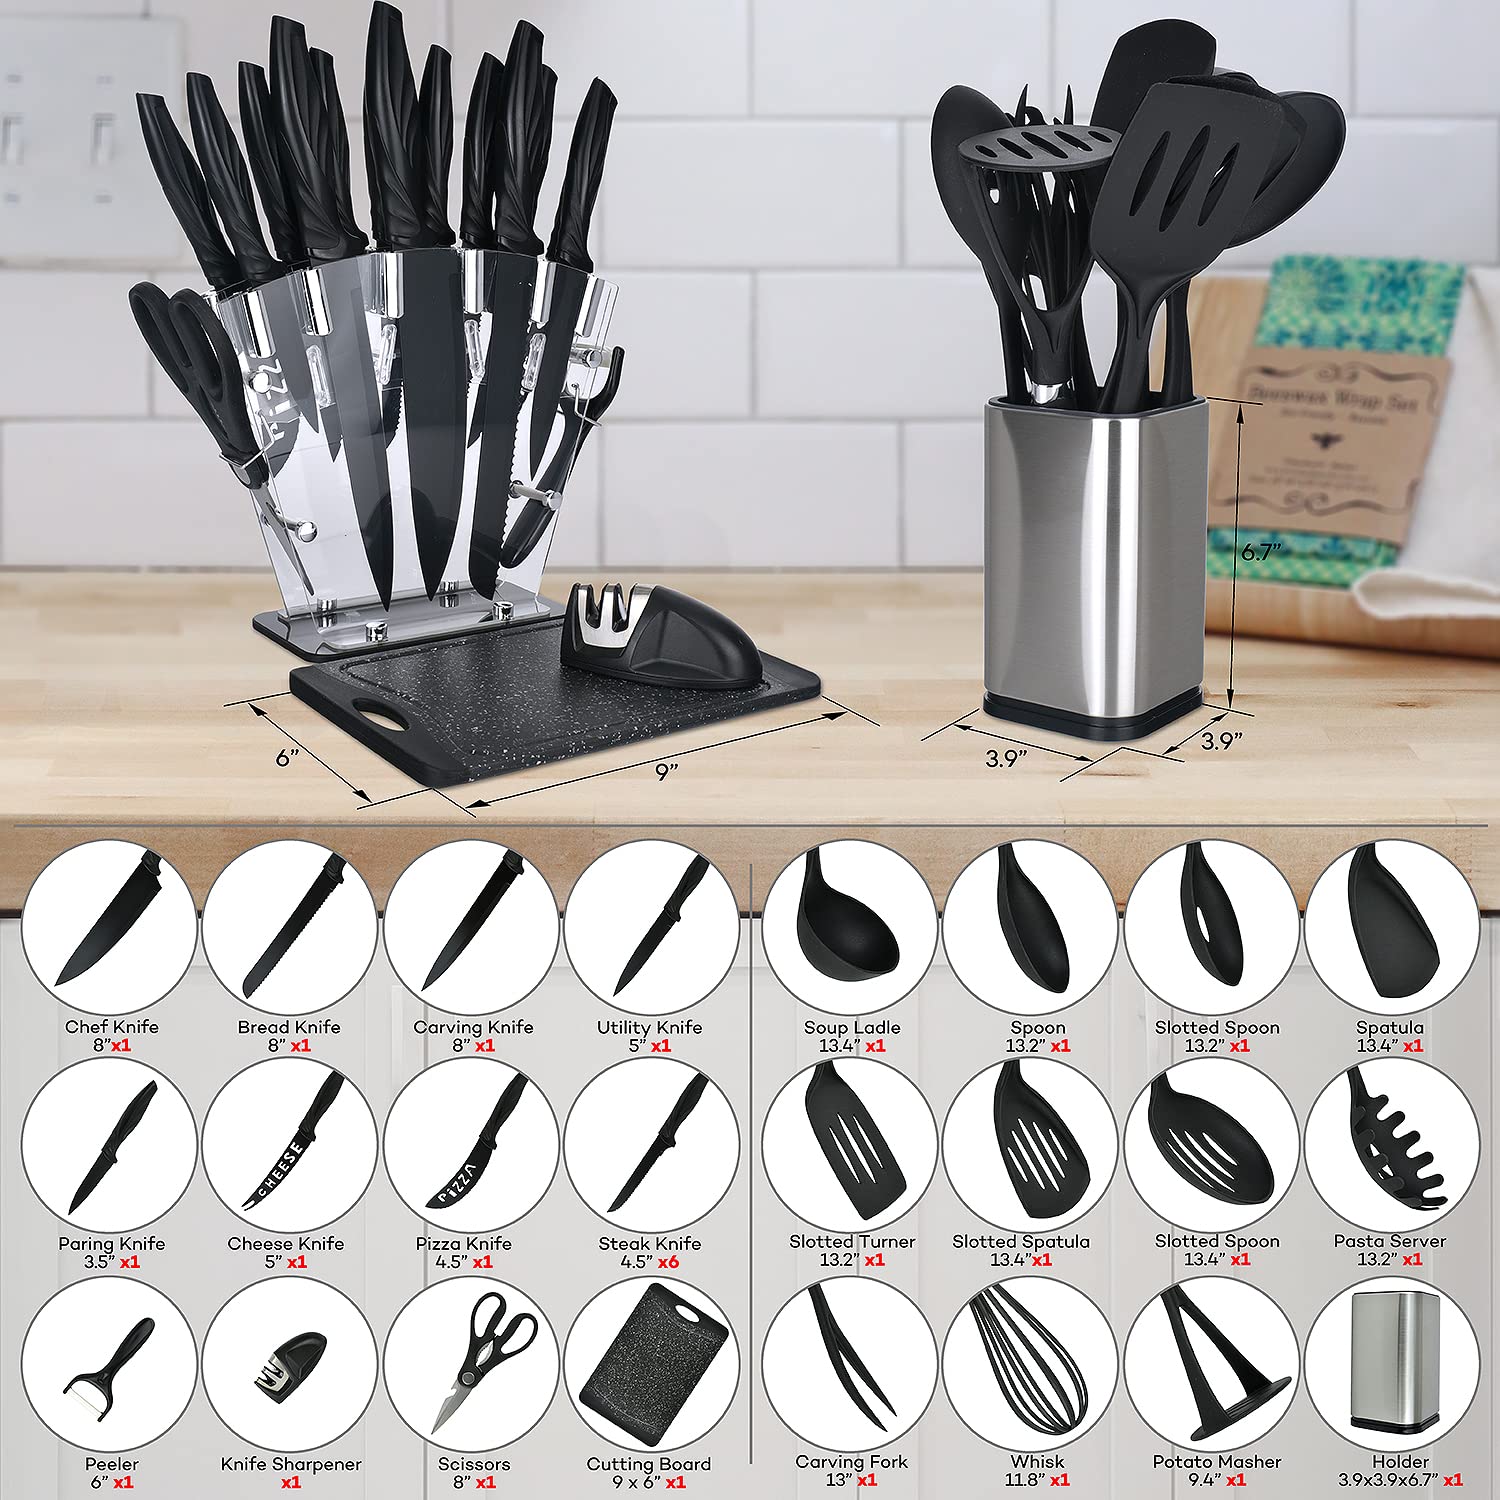 30 Pieces Knife Set and kitchen utensil set, silicone cooking utensils set for kitchen essentials with Knife Sharpener, 11 Pcs black knife set, Cutting Board essential knife and cutting board set